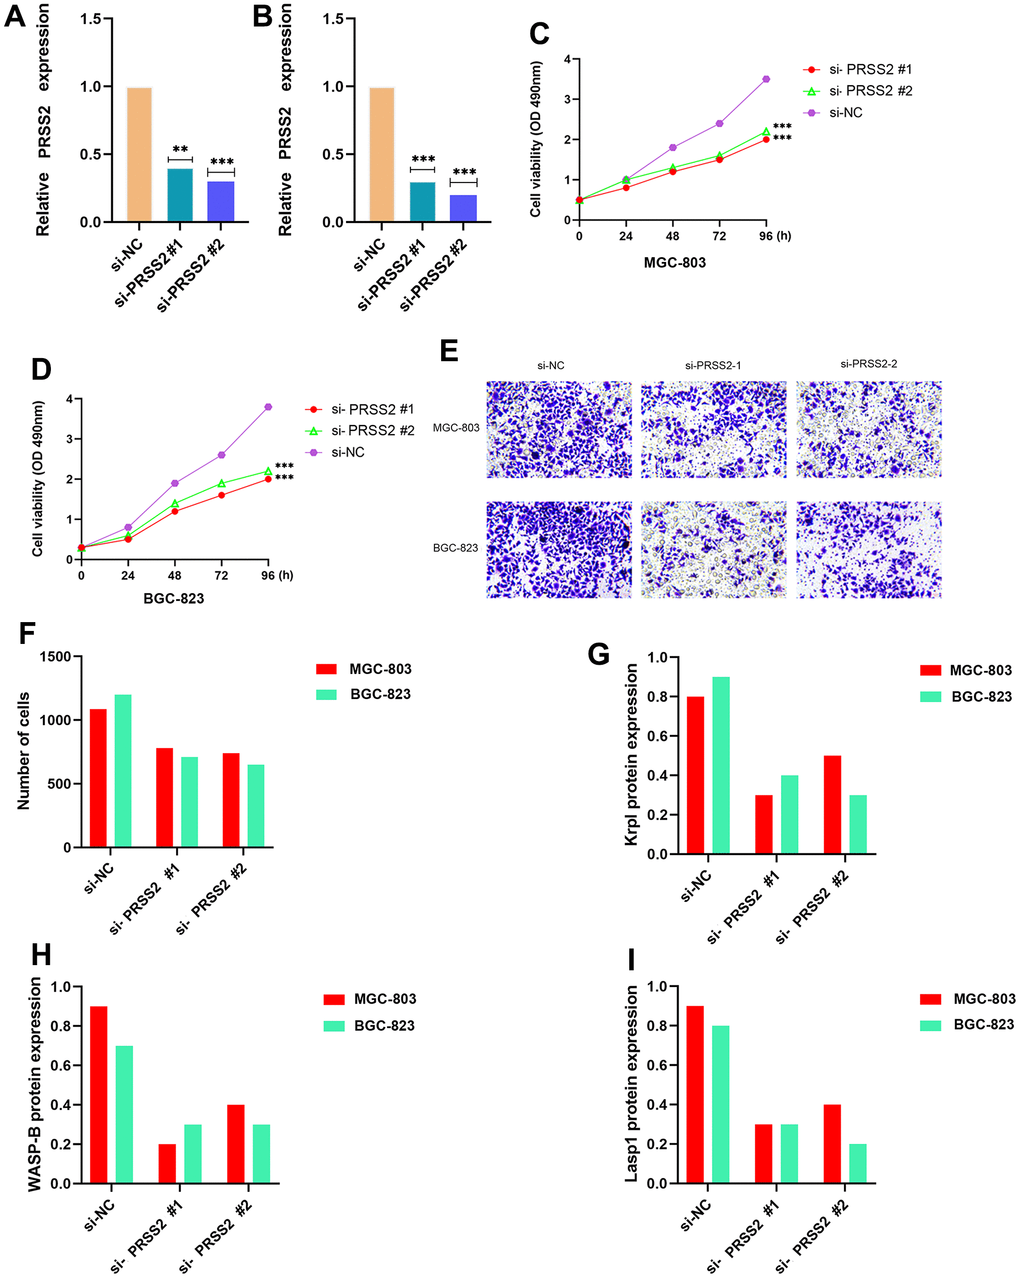 Effects of PRSS2 knockdown on GC cell viability and migratory capacity in vitro. (A, B) PRSS2 expression in MGC-803 and BGC-823 cells transfected with negative control siRNA (si-NC) or siRNAs targeting PRSS2 (si-PRSS2 #1 and #2) for 48h n=3 for each group. (C, D) Cell viability was assessed using a CCK-8 assay in MGC-803 and BGC-823 cells transfected with si-NC or si-PRSS2 #1 and #2 for 48h n=6 for each group. (E, F) Transwell invasion assay was performed to determine the invasion ability of si-PRSS2-transfected MGC-803 and BGC-823 cells for 48h n=3 for each group. (G–I) qPCR detection of invasive pseudopod-related proteins Krp1, WASP-B, and Lasp1. n = 3. *P **P ***P 